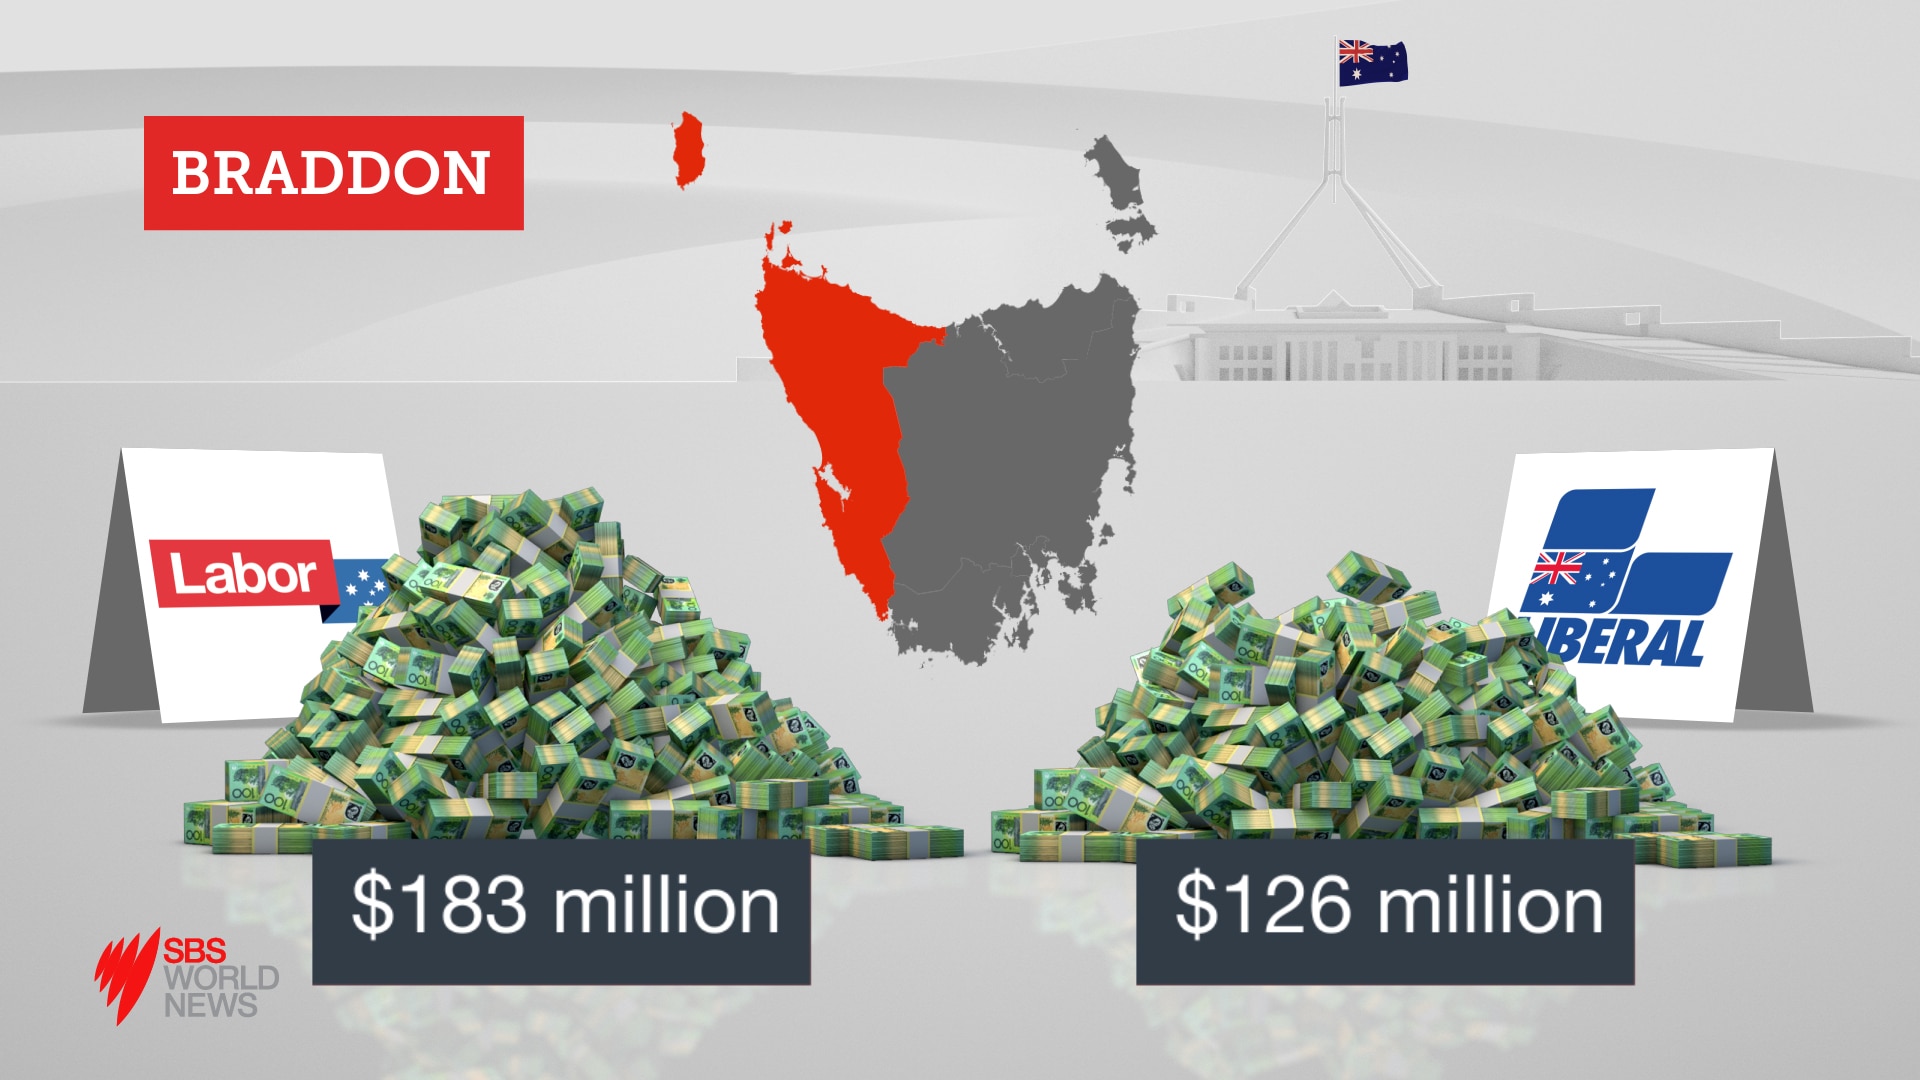 The total campaign contributions in Braddon from the major parties can be divided into $4778 per voter.